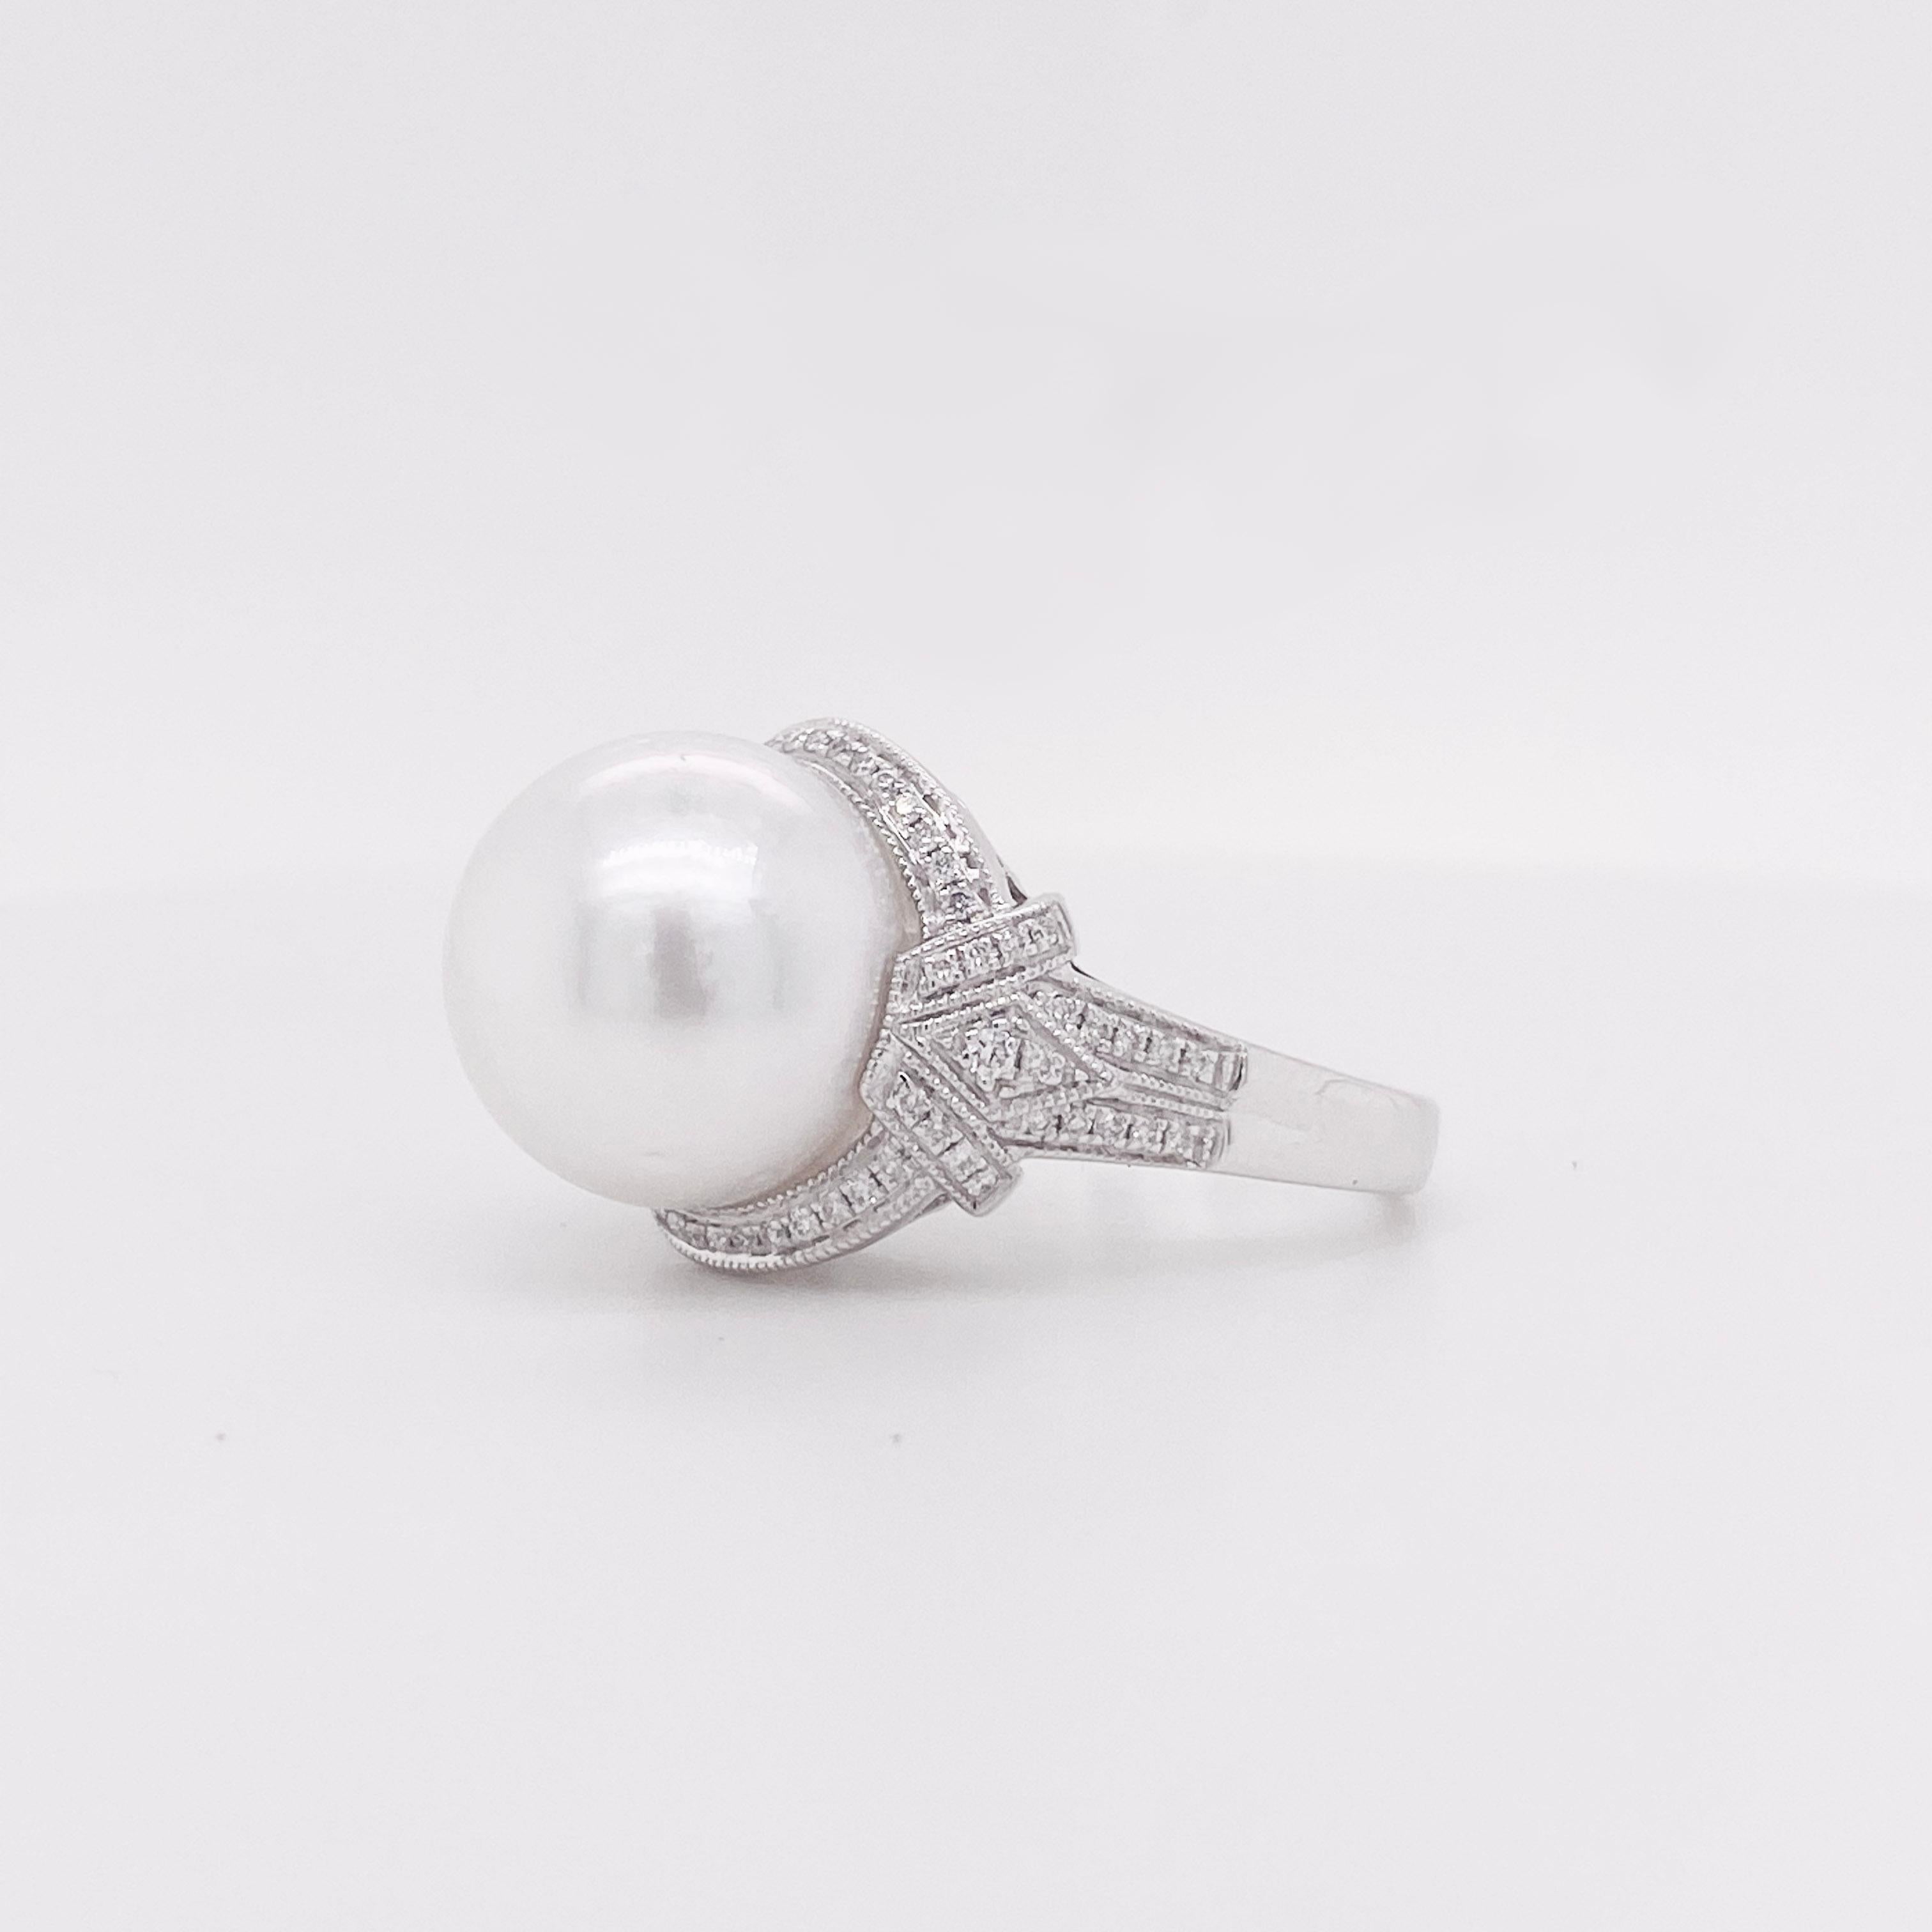 For Sale:  South Sea Pearl w Diamond Statement Ring, White Gold, Pearl Cultured 2